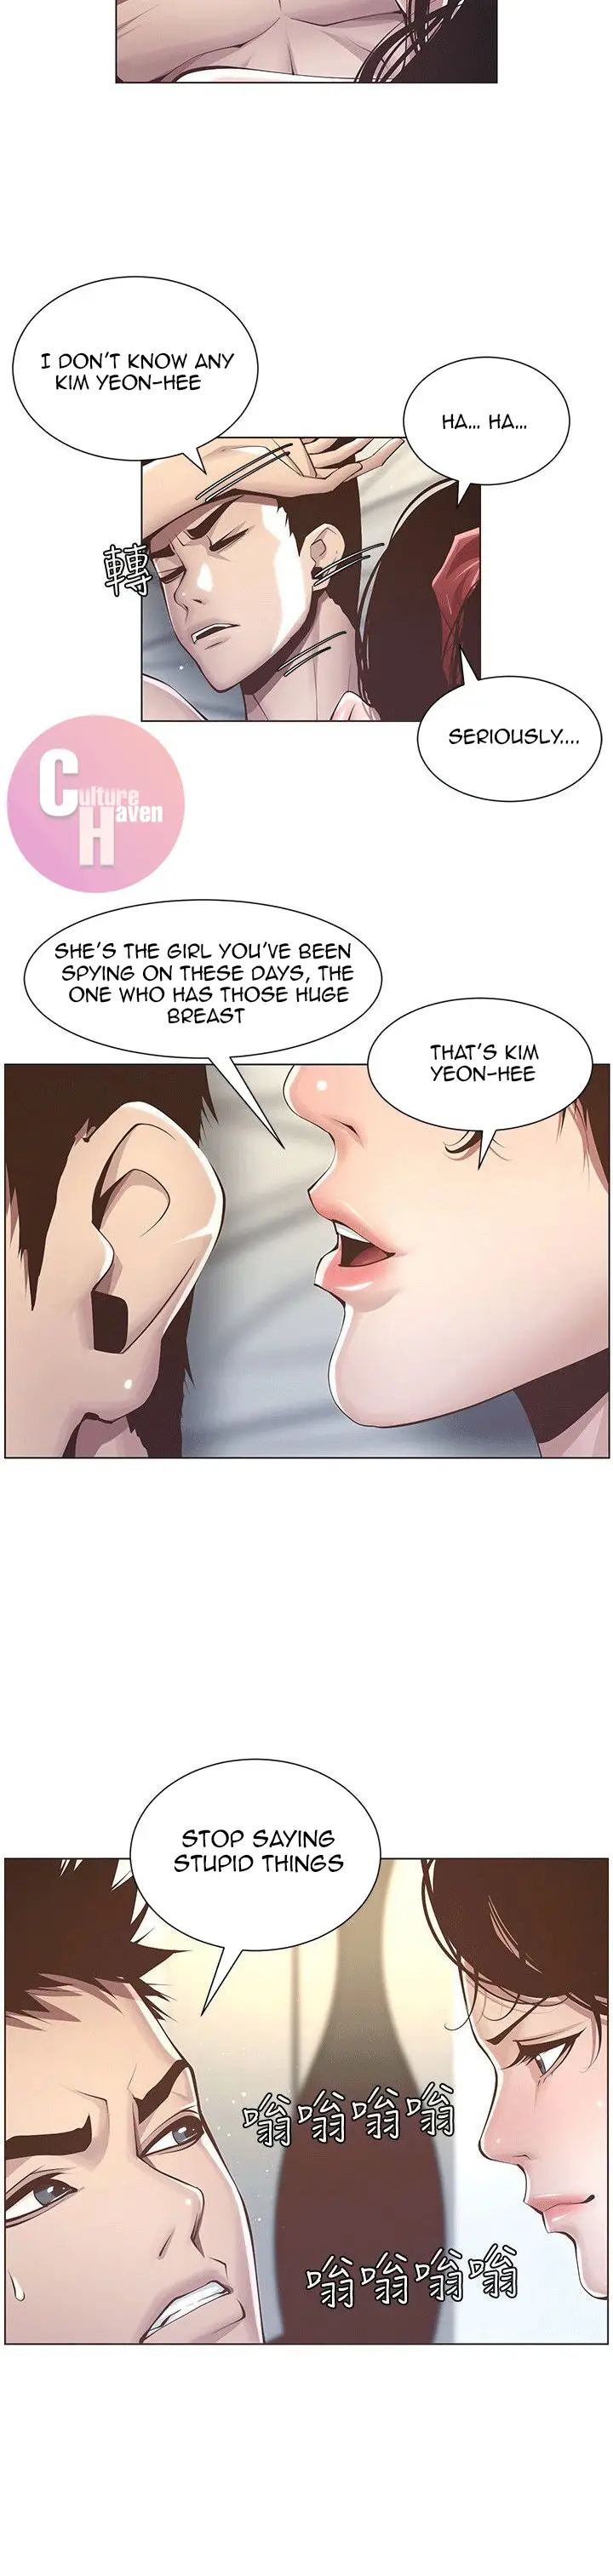 fathers-lust-chap-3-27